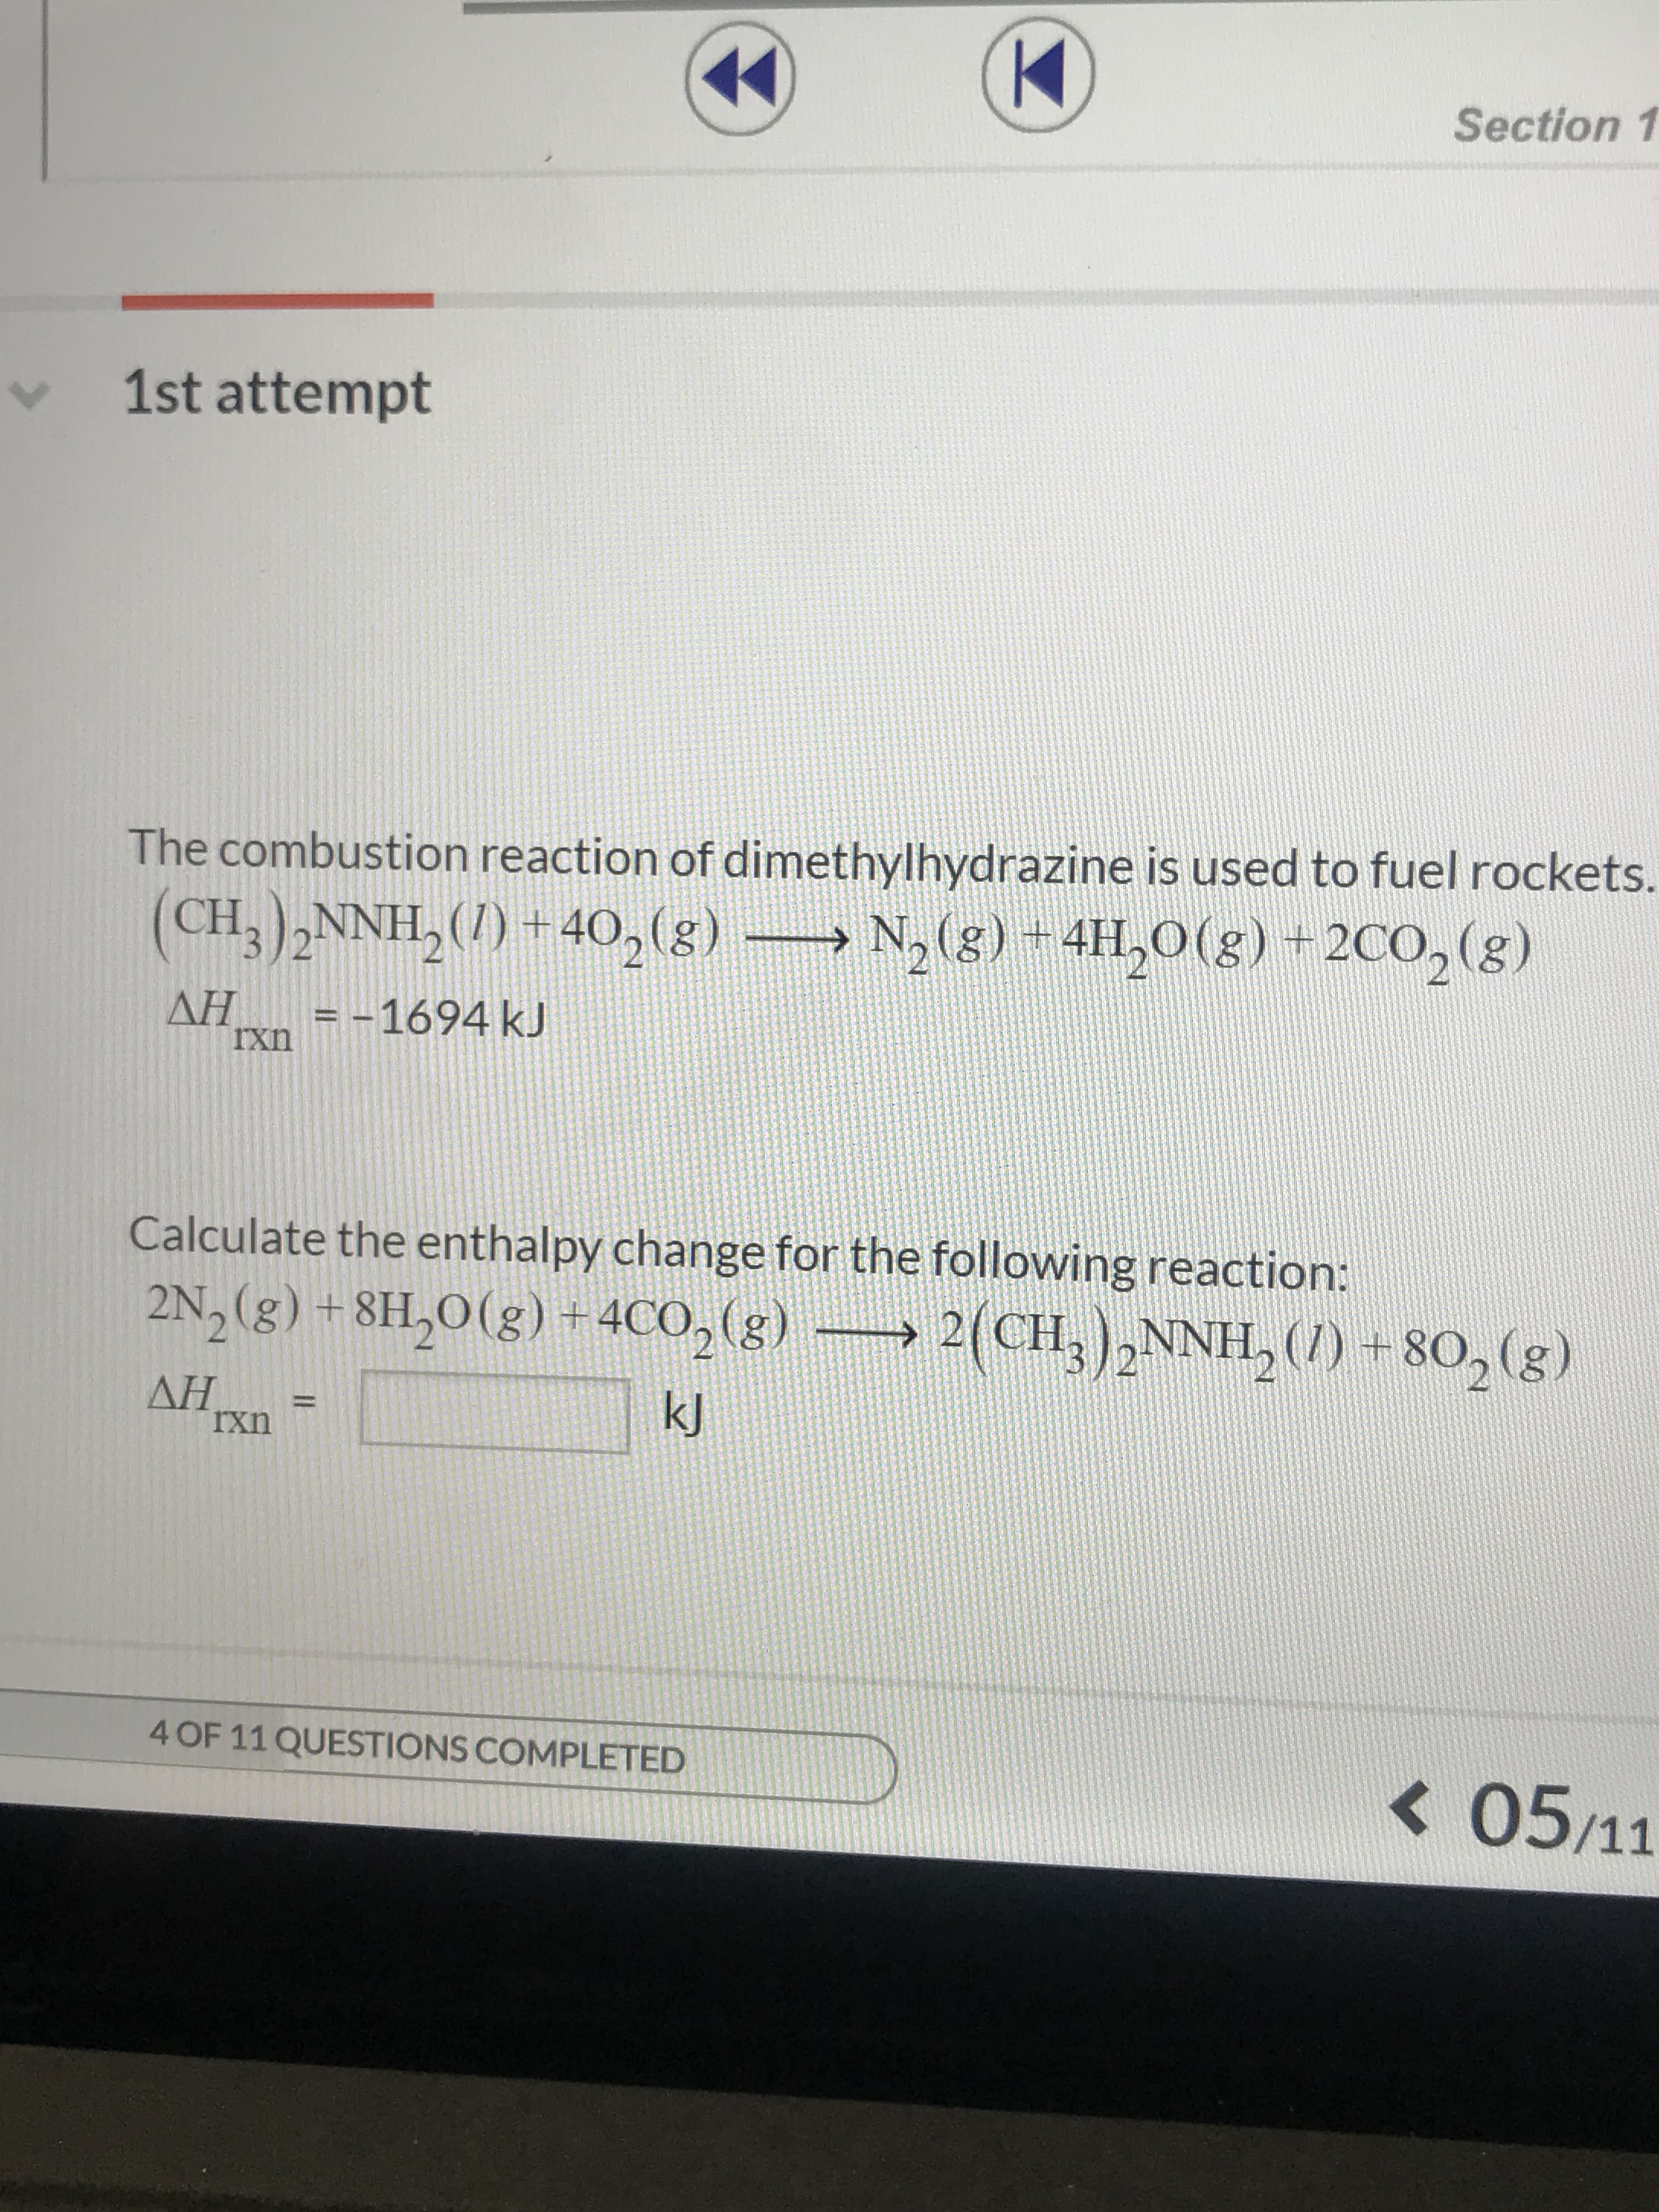 Section 1
1st attempt
The combustion reaction of dimethylhydrazine is used to fuel rockets.
(CH3)2NNH,()+40, (g) N,(g) + 4H,O(g) +2CO2(g)
AH -1694 kJ
rxn
Calculate the enthalpy change for the following reaction:
2N, (g) +8H2O(g) + 4CO2 (g)
2(CH,)2NNH, ()+80, (g)
AH
Ixn
kJ
4 OF 11 QUESTIONS COMPLETED
05/11
